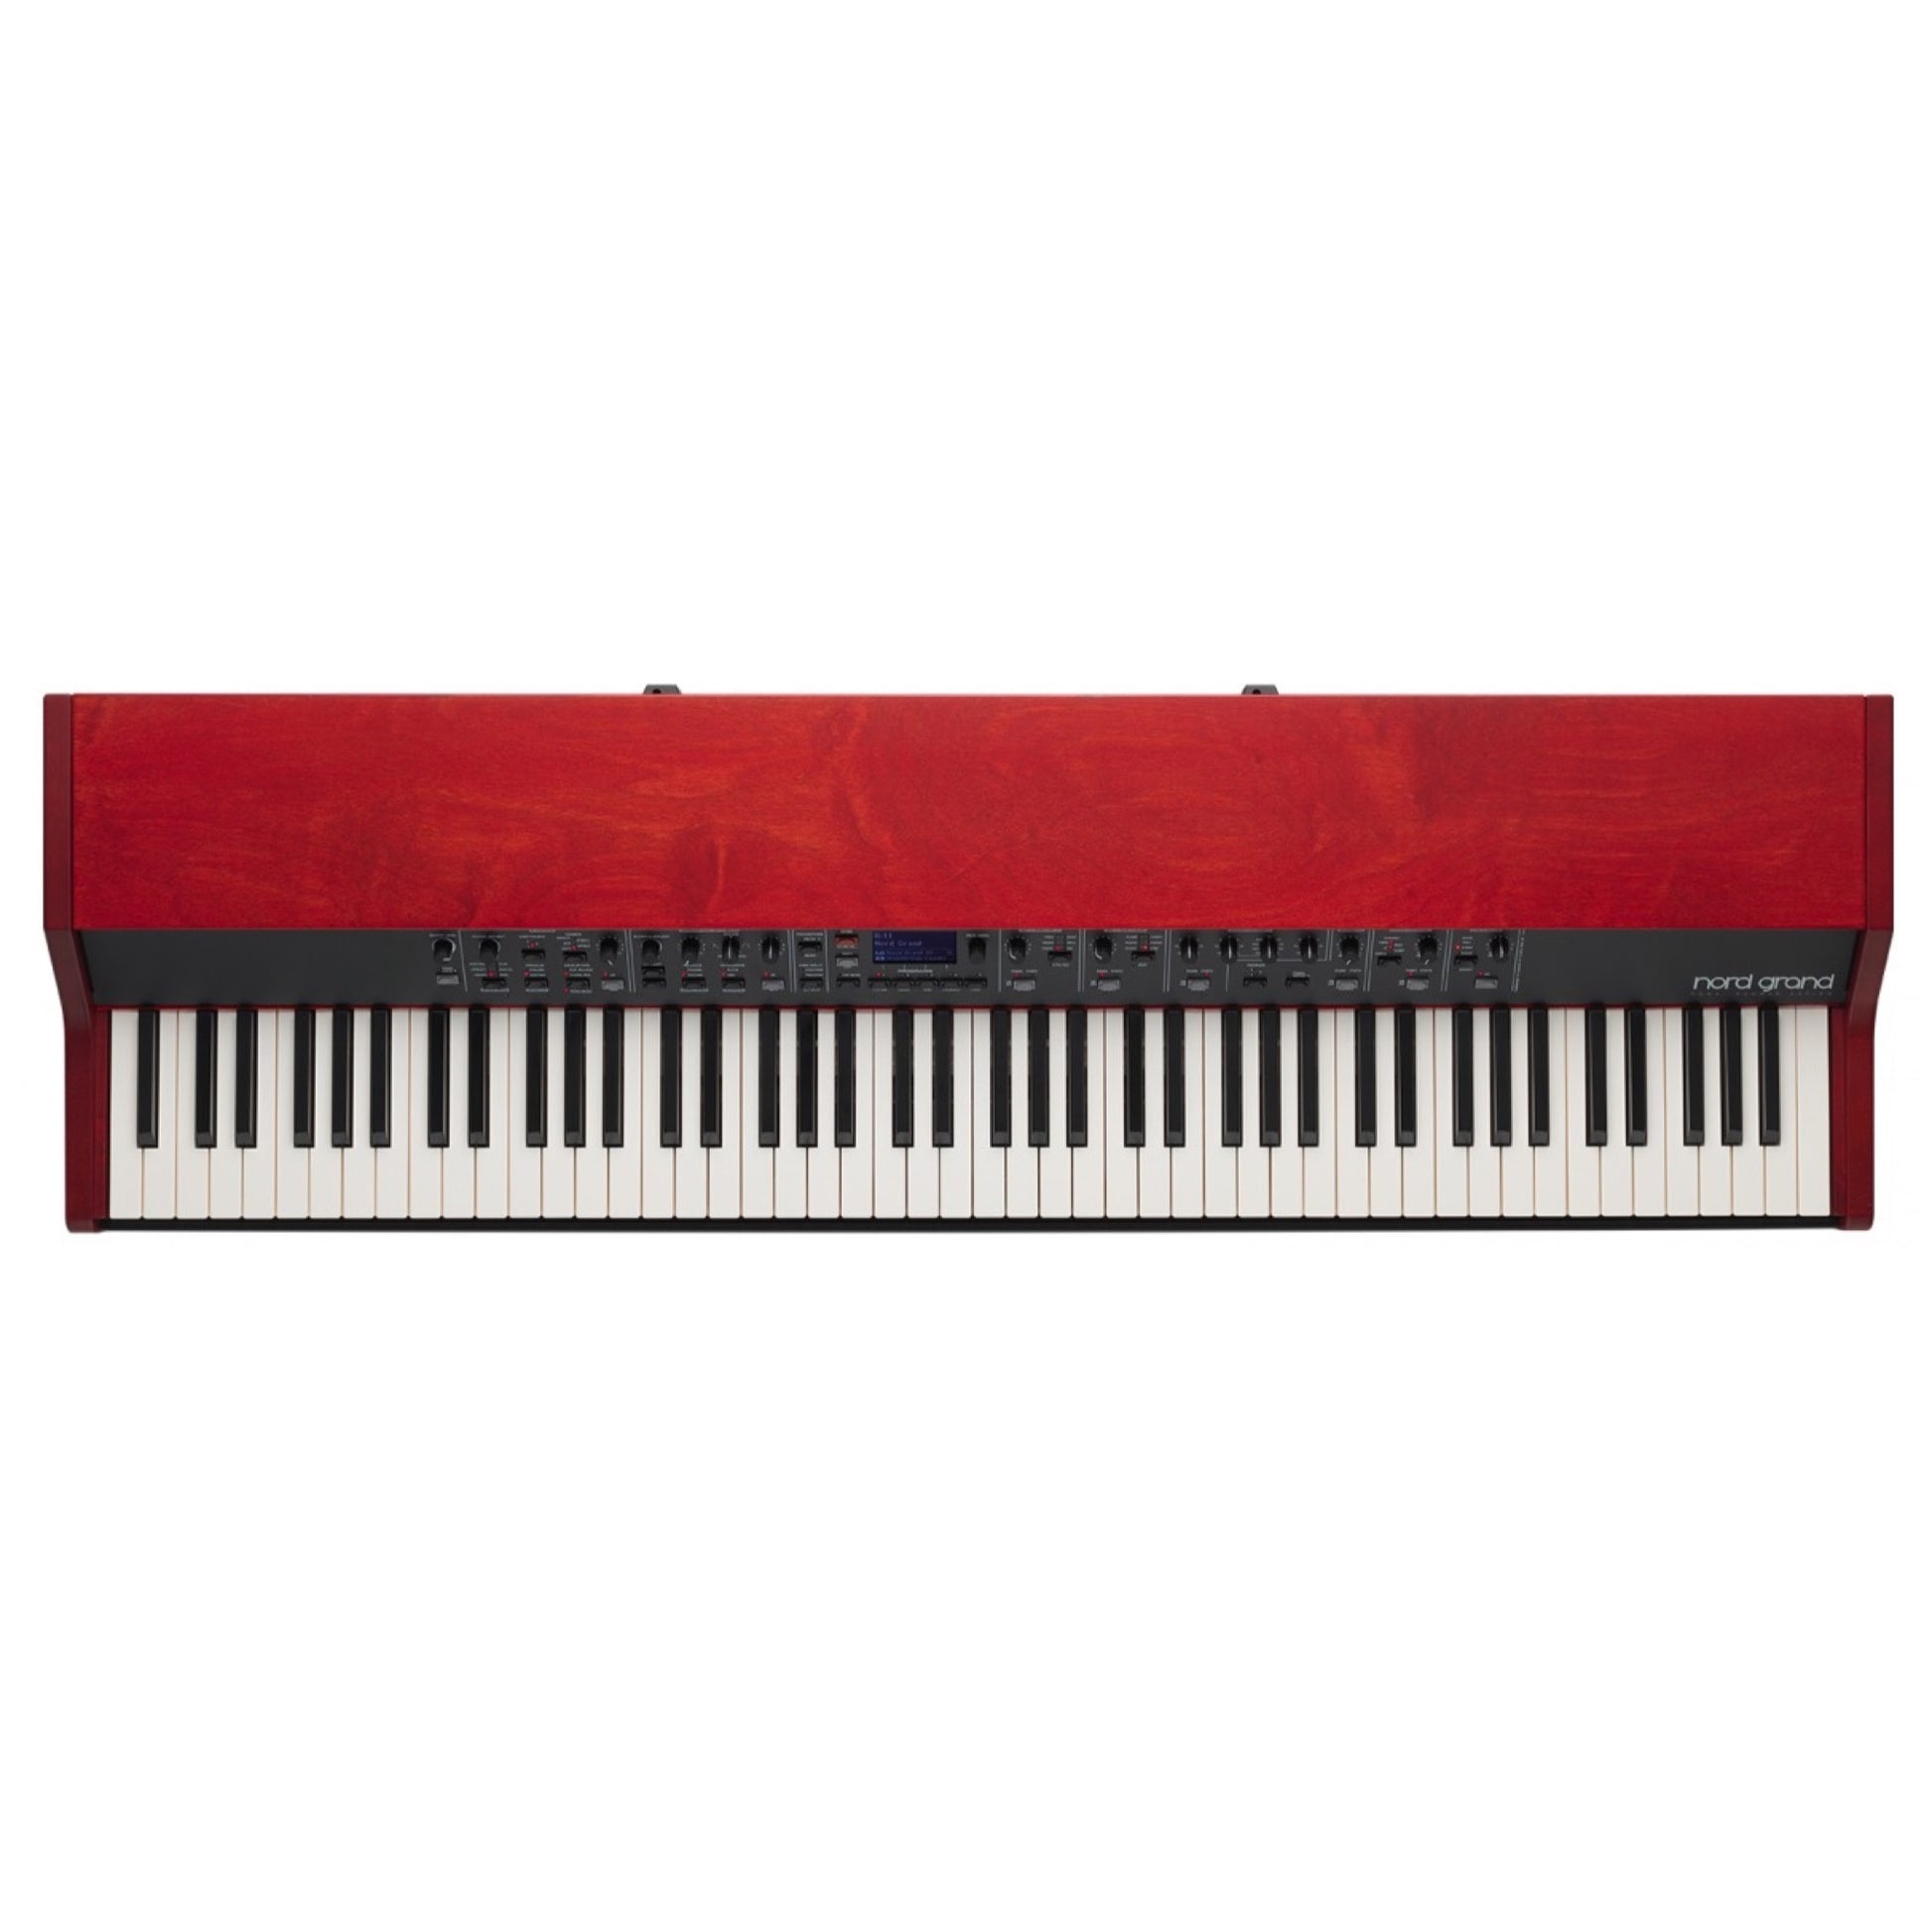 Nord Grand Hammer Action Digital Stage Piano, 88-Key